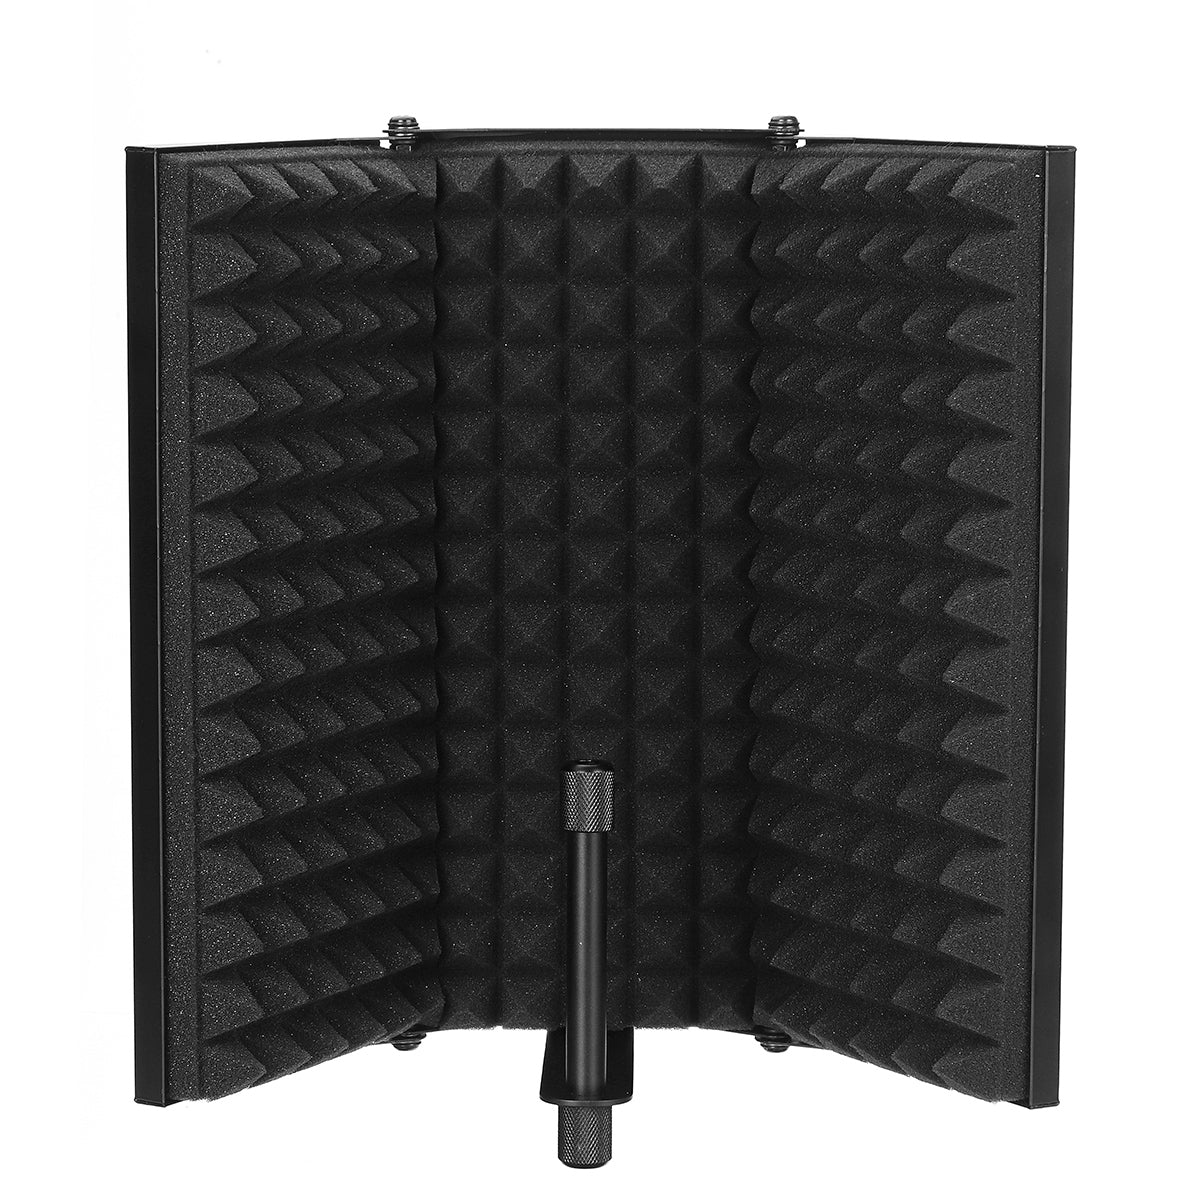 Foldable Microphone Acoustic Isolation Shield Acoustic Foams Studio Three-door Noise Enclosure Panel Filter